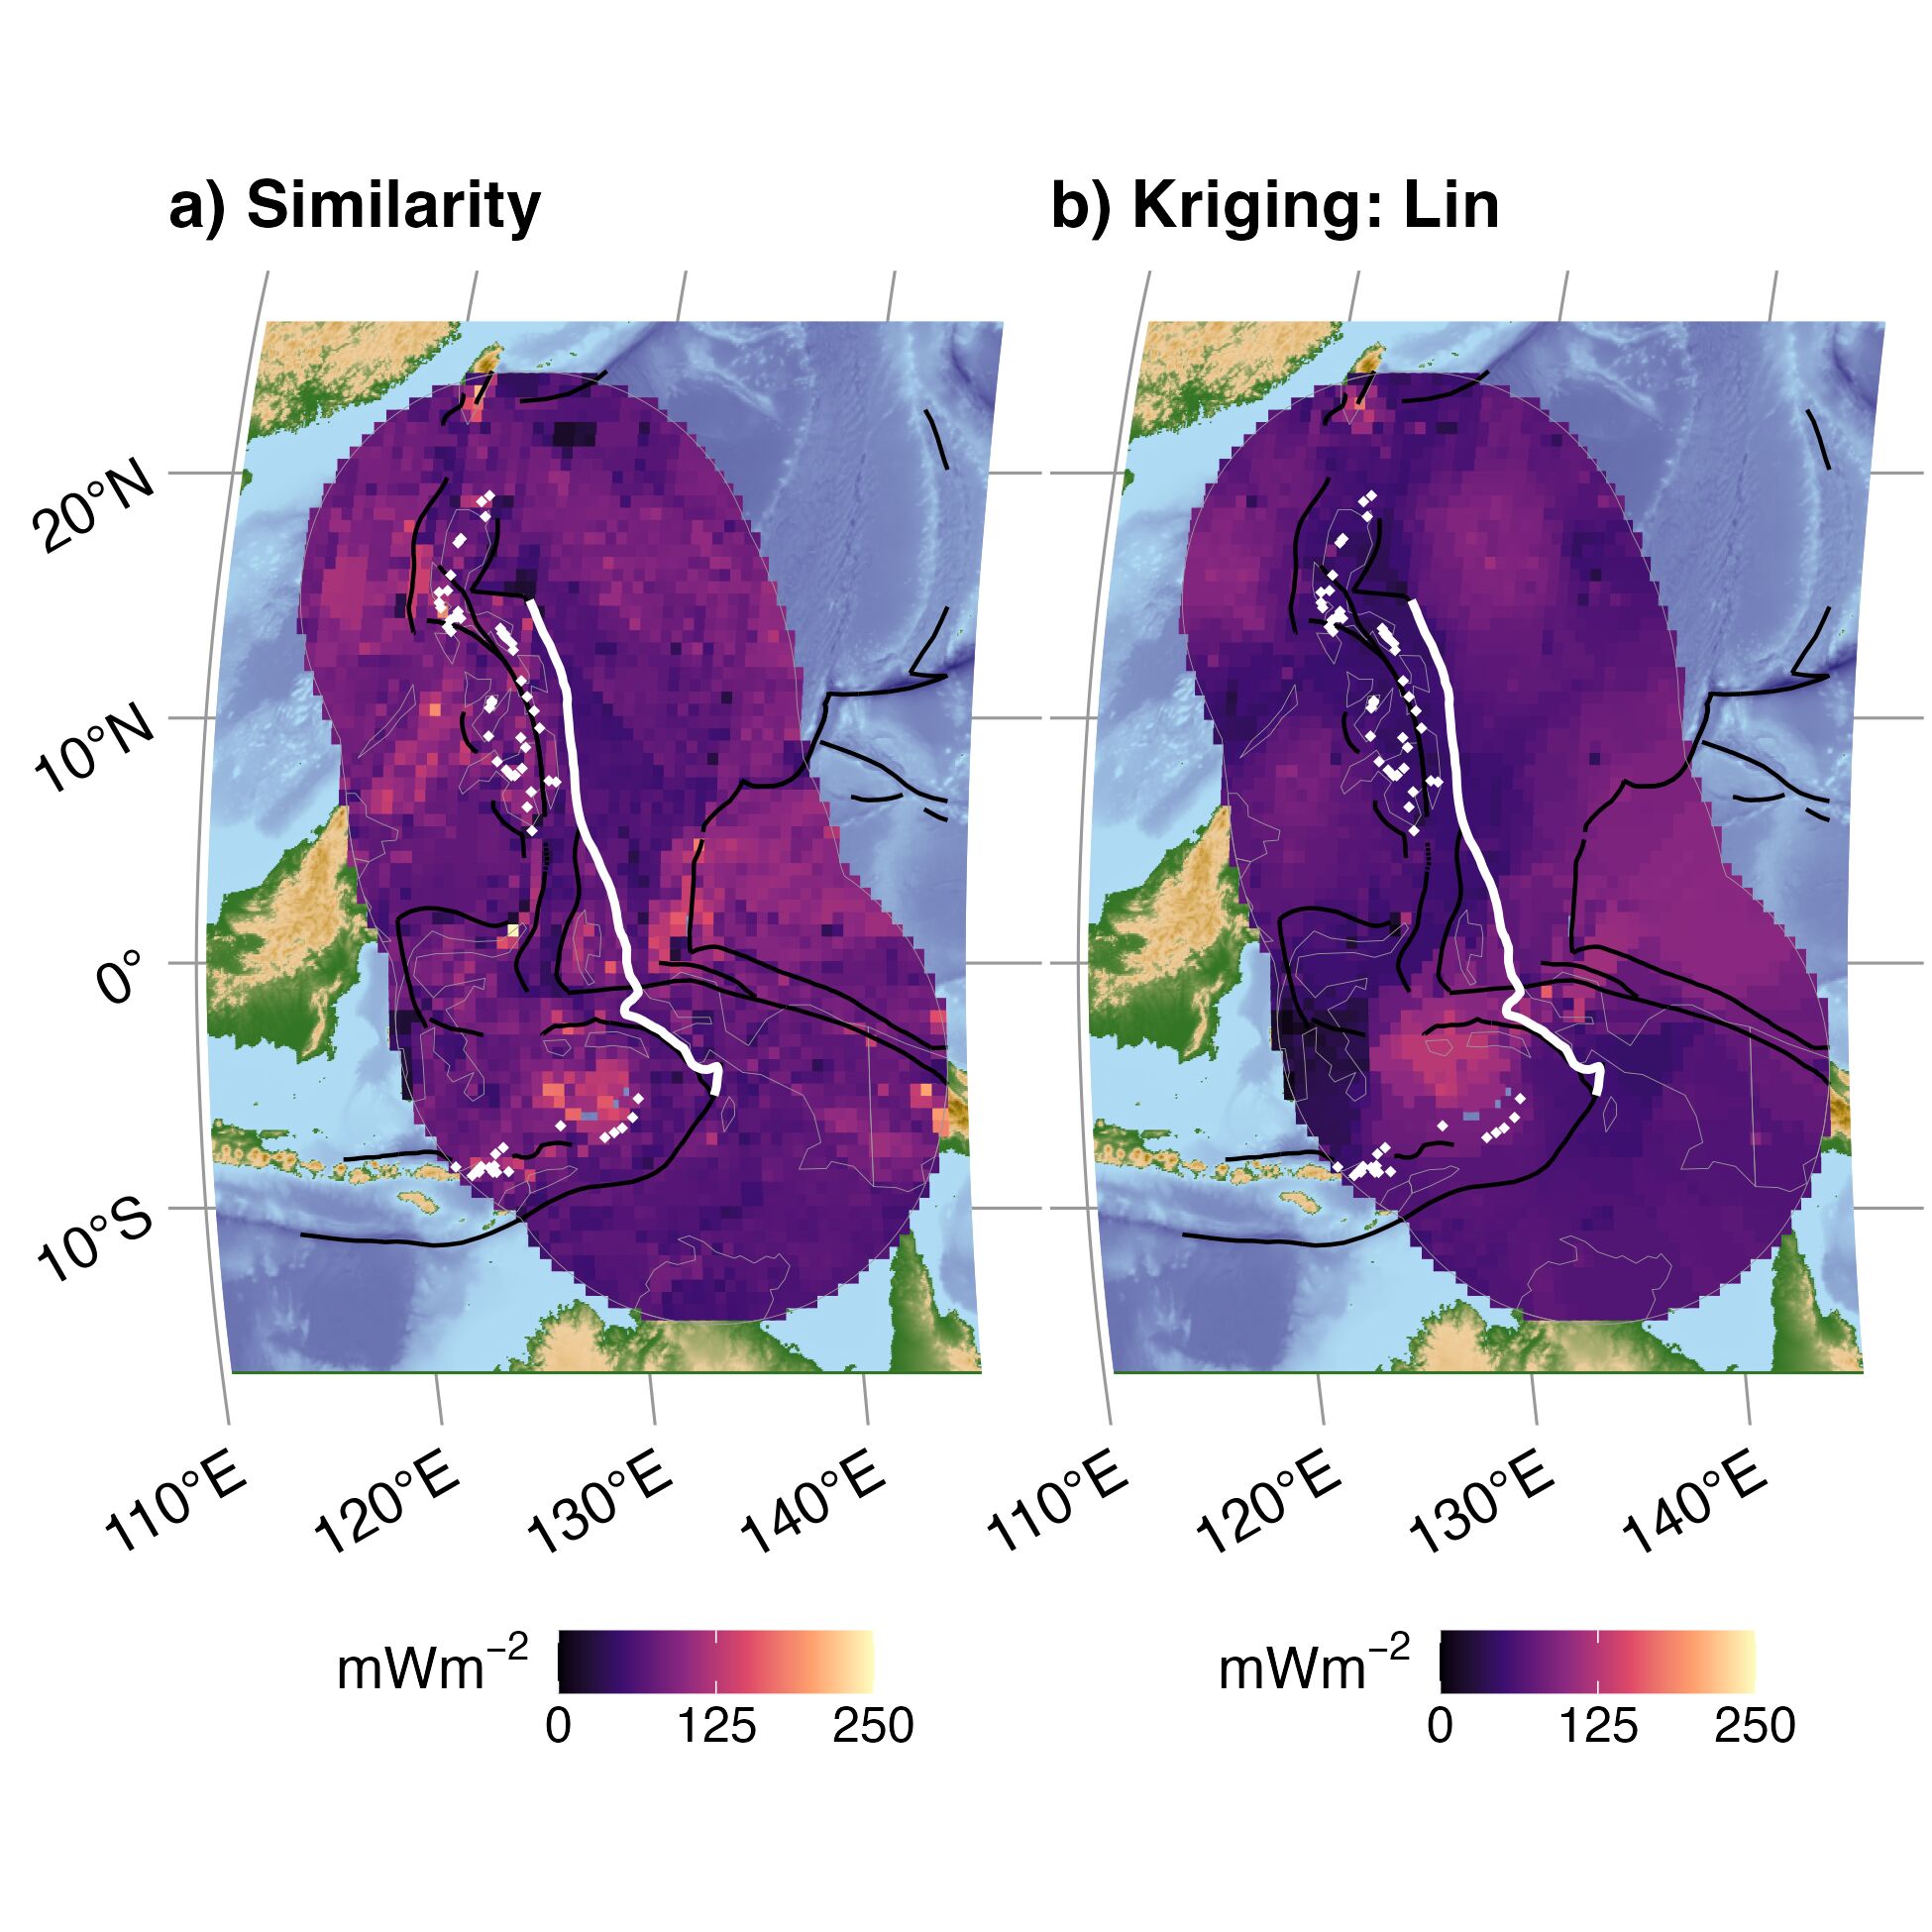 Similarity (a) and Kriging (b) interpolations for S Philippines. Refer to the main text for explanation of panels and colors.